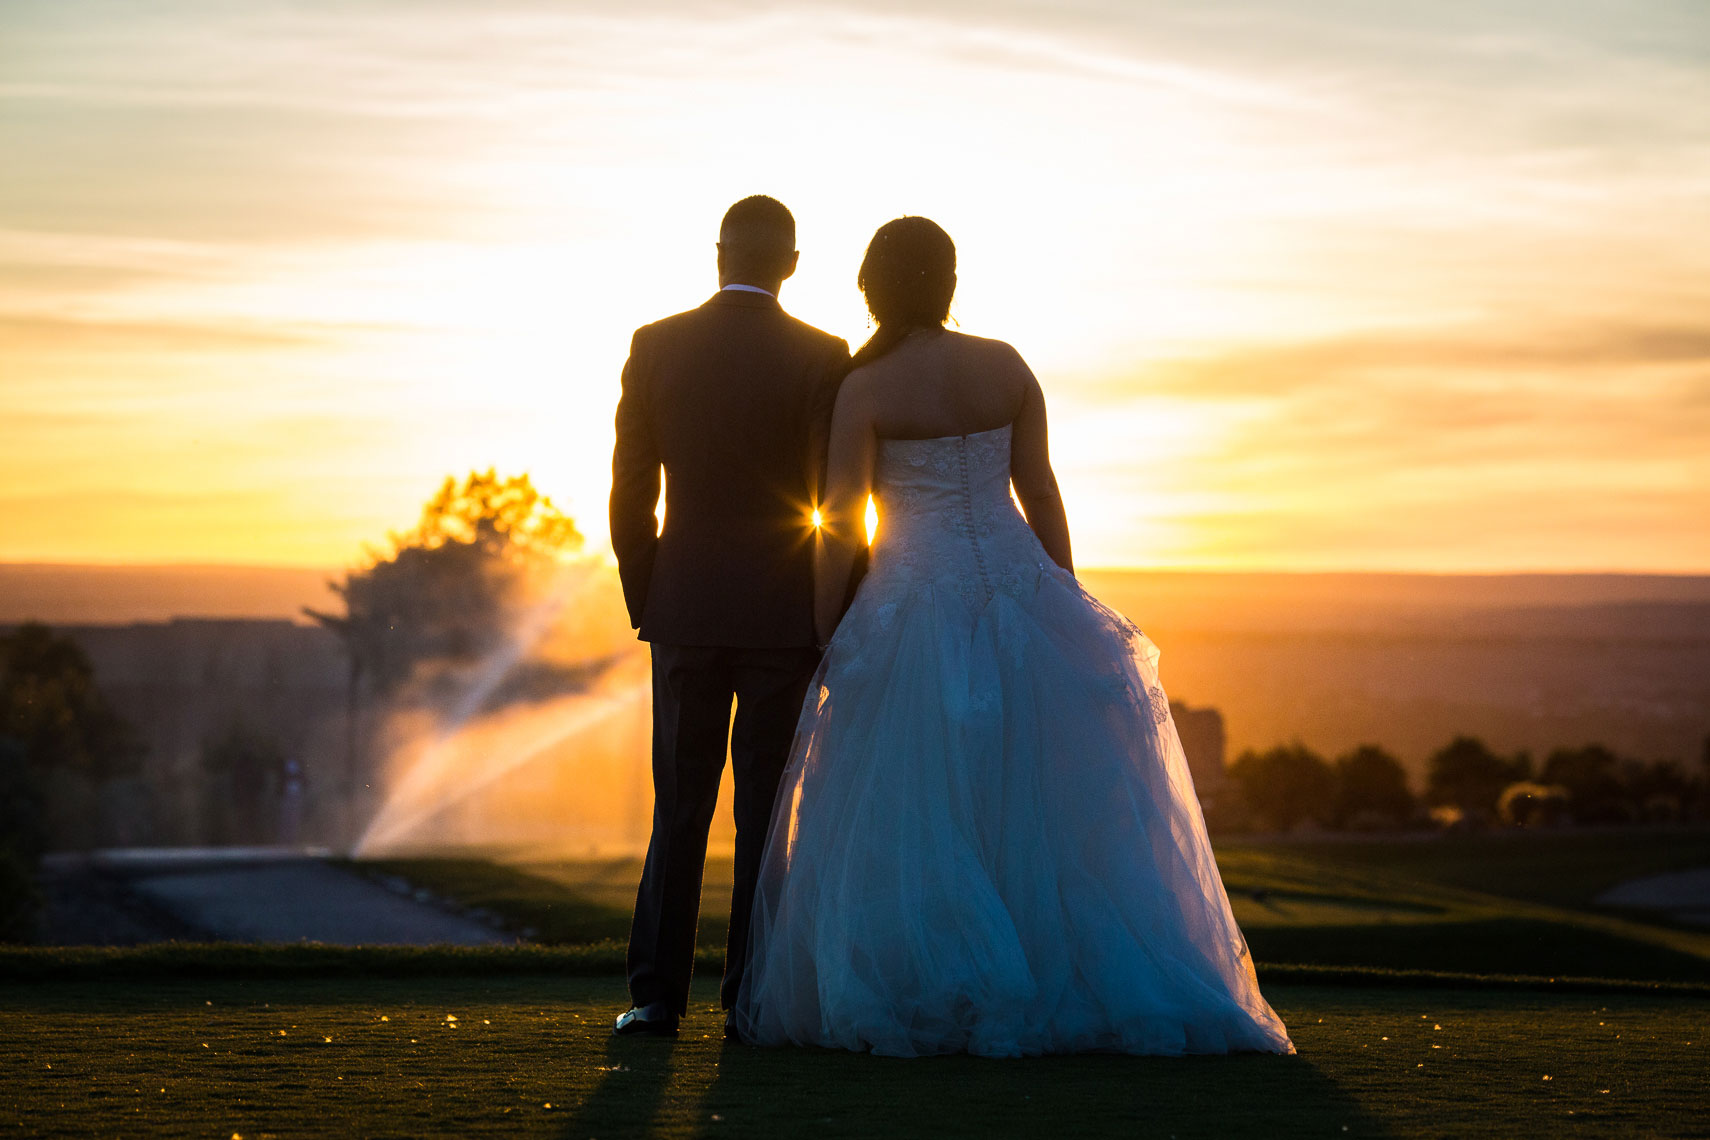 Sandia Resort Wedding at sunset with the sprinkler system blocking the way back for the bride and groom